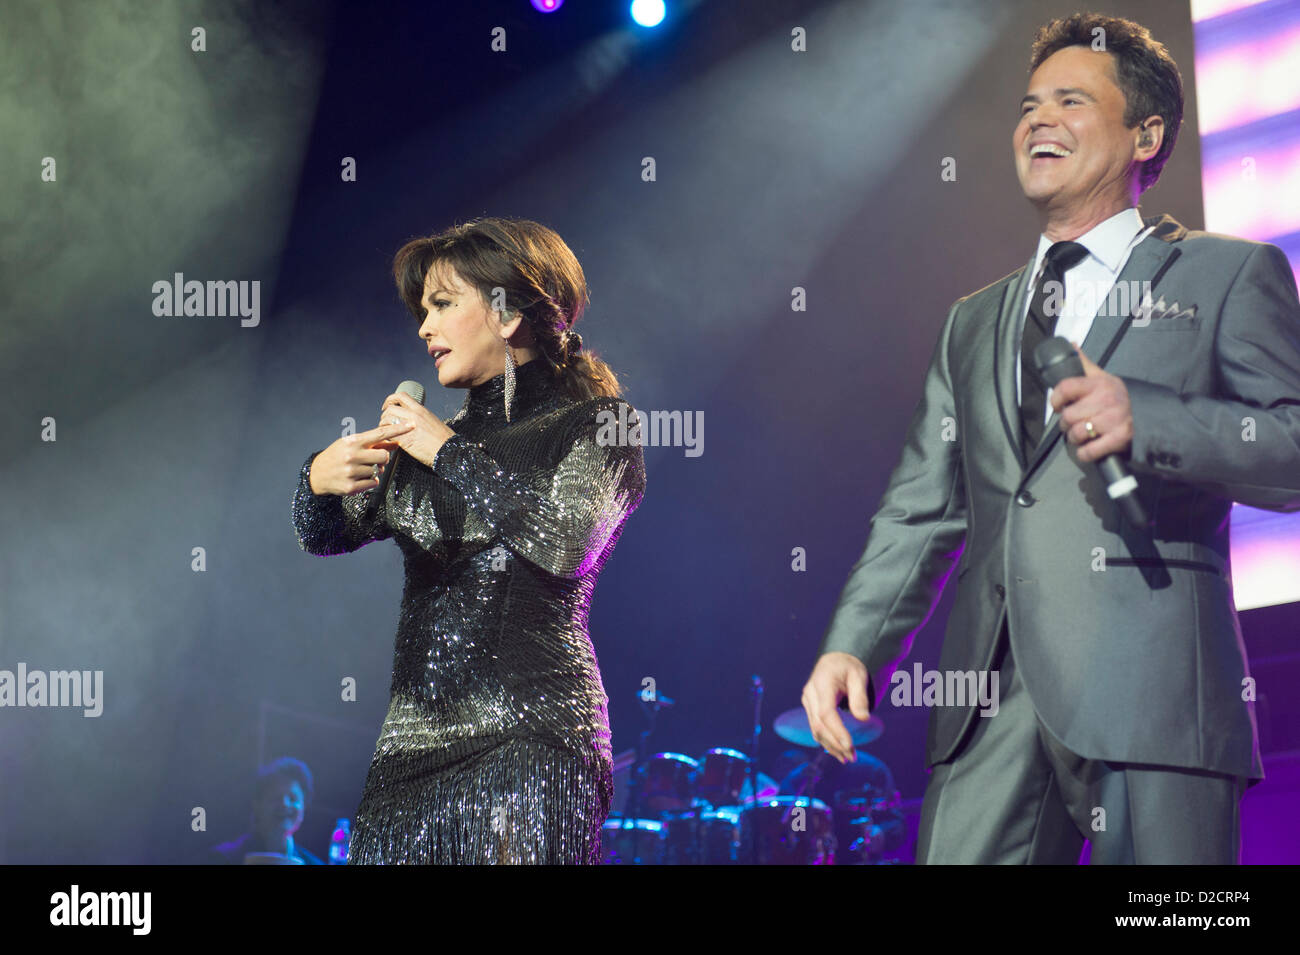 Donny and Marie Osmond at the O2 Arena in London, at the start of their UK Tour. It is the first time they have toured together. Stock Photo